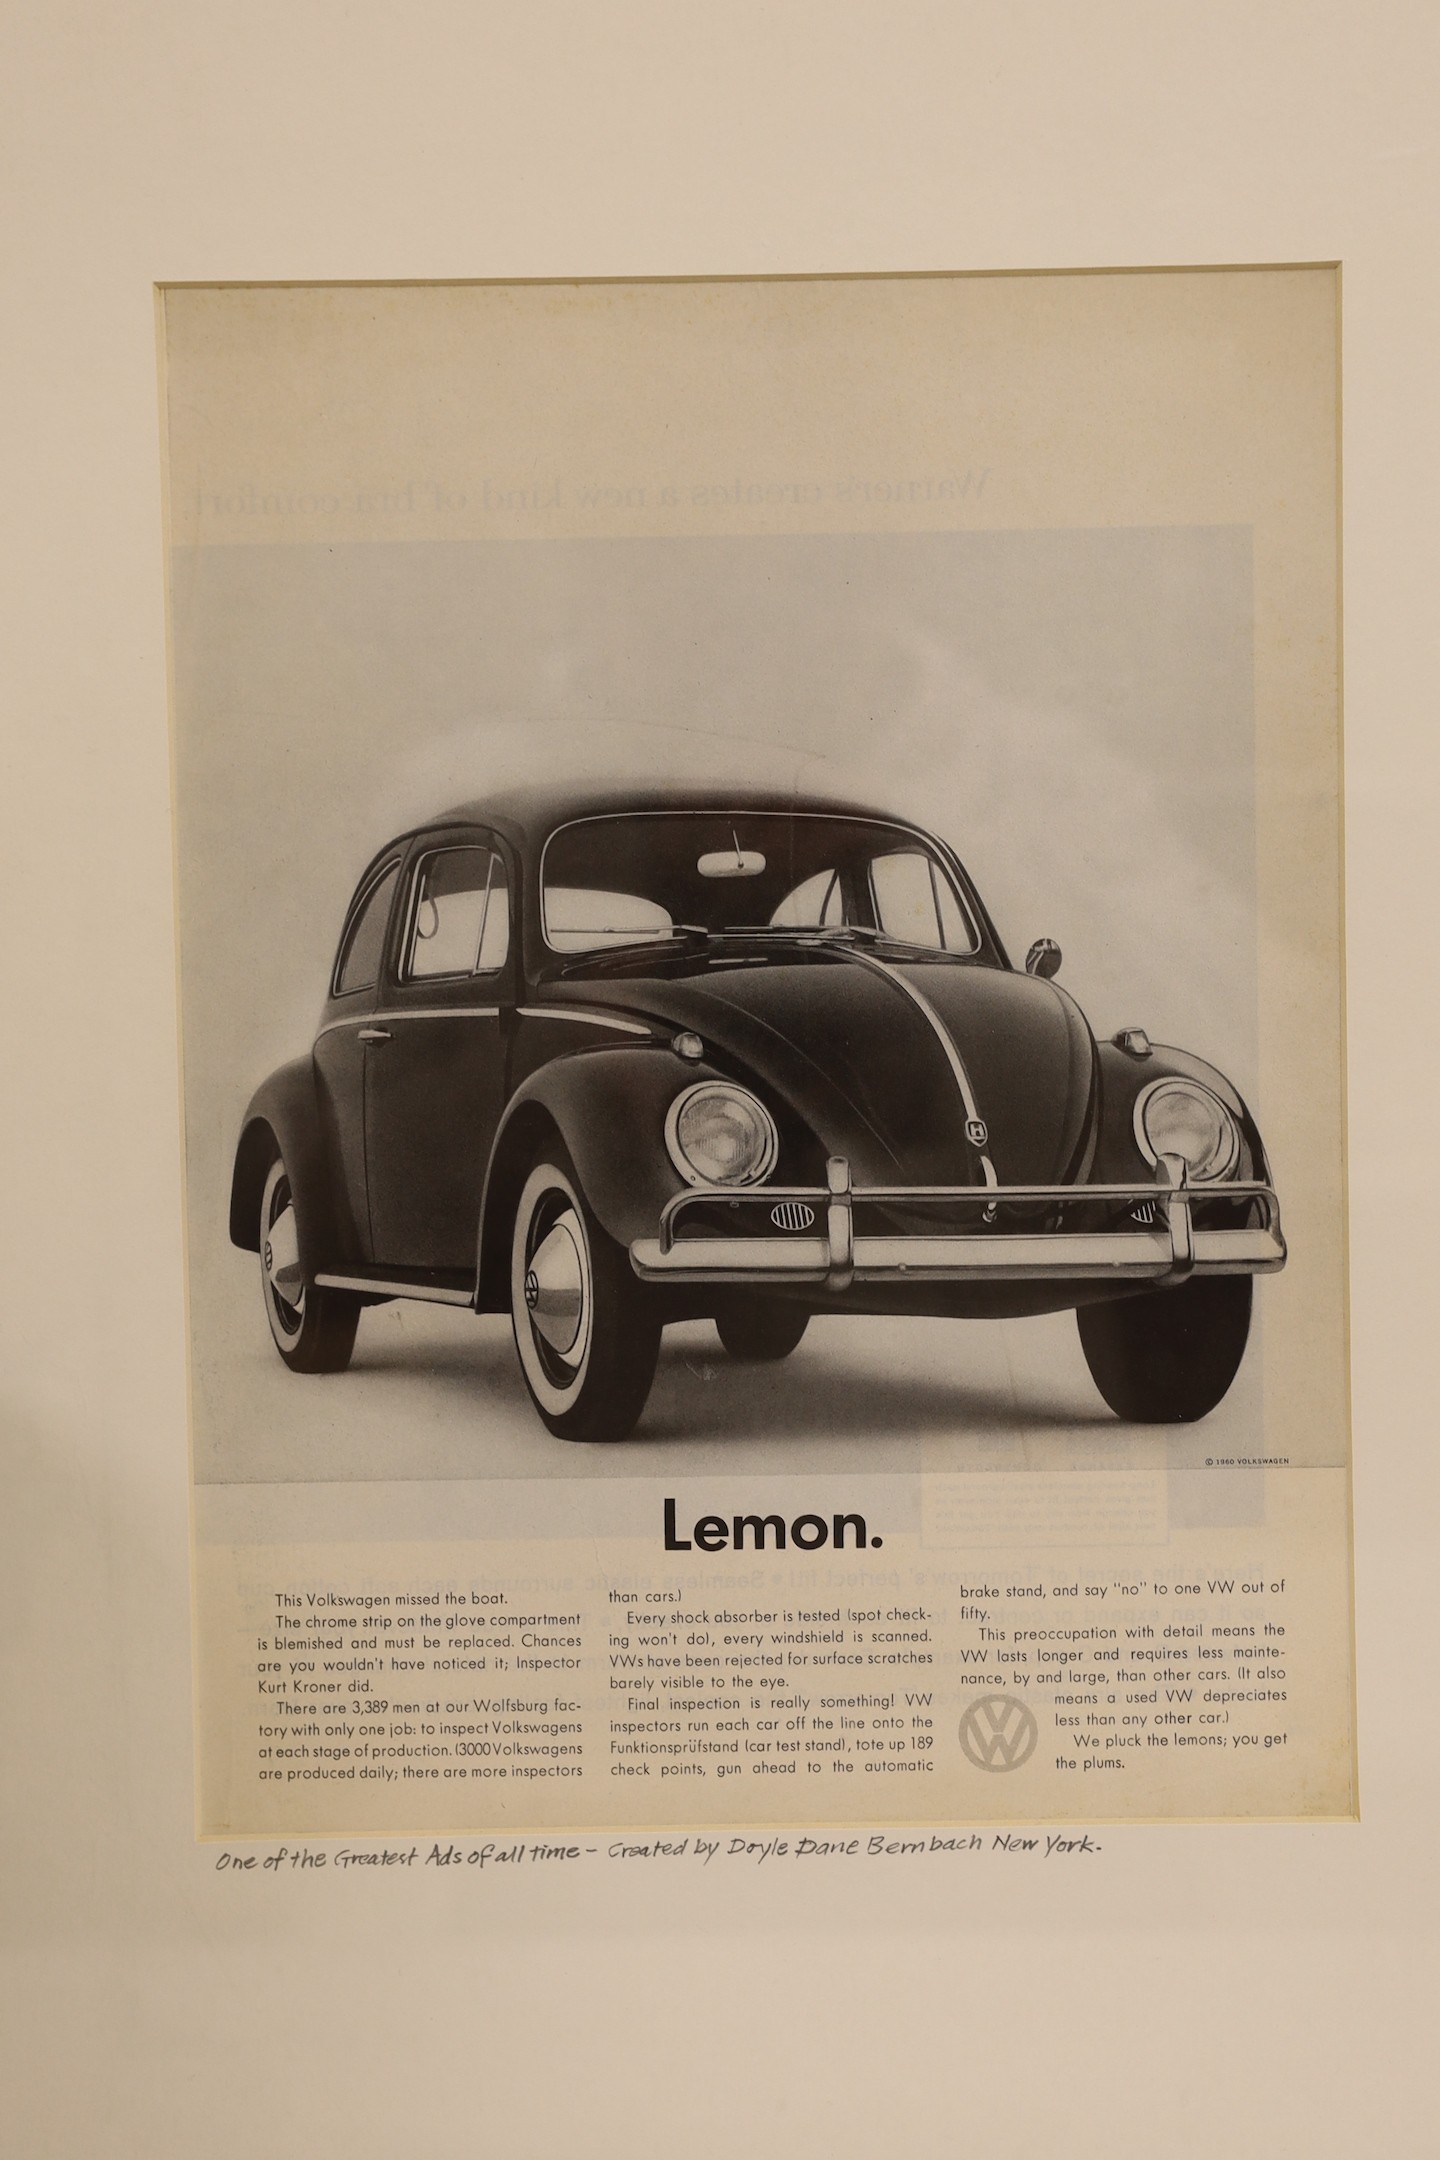 Lemon - an advertising print 'One of the Greatest Ads of all time' 1970, framed